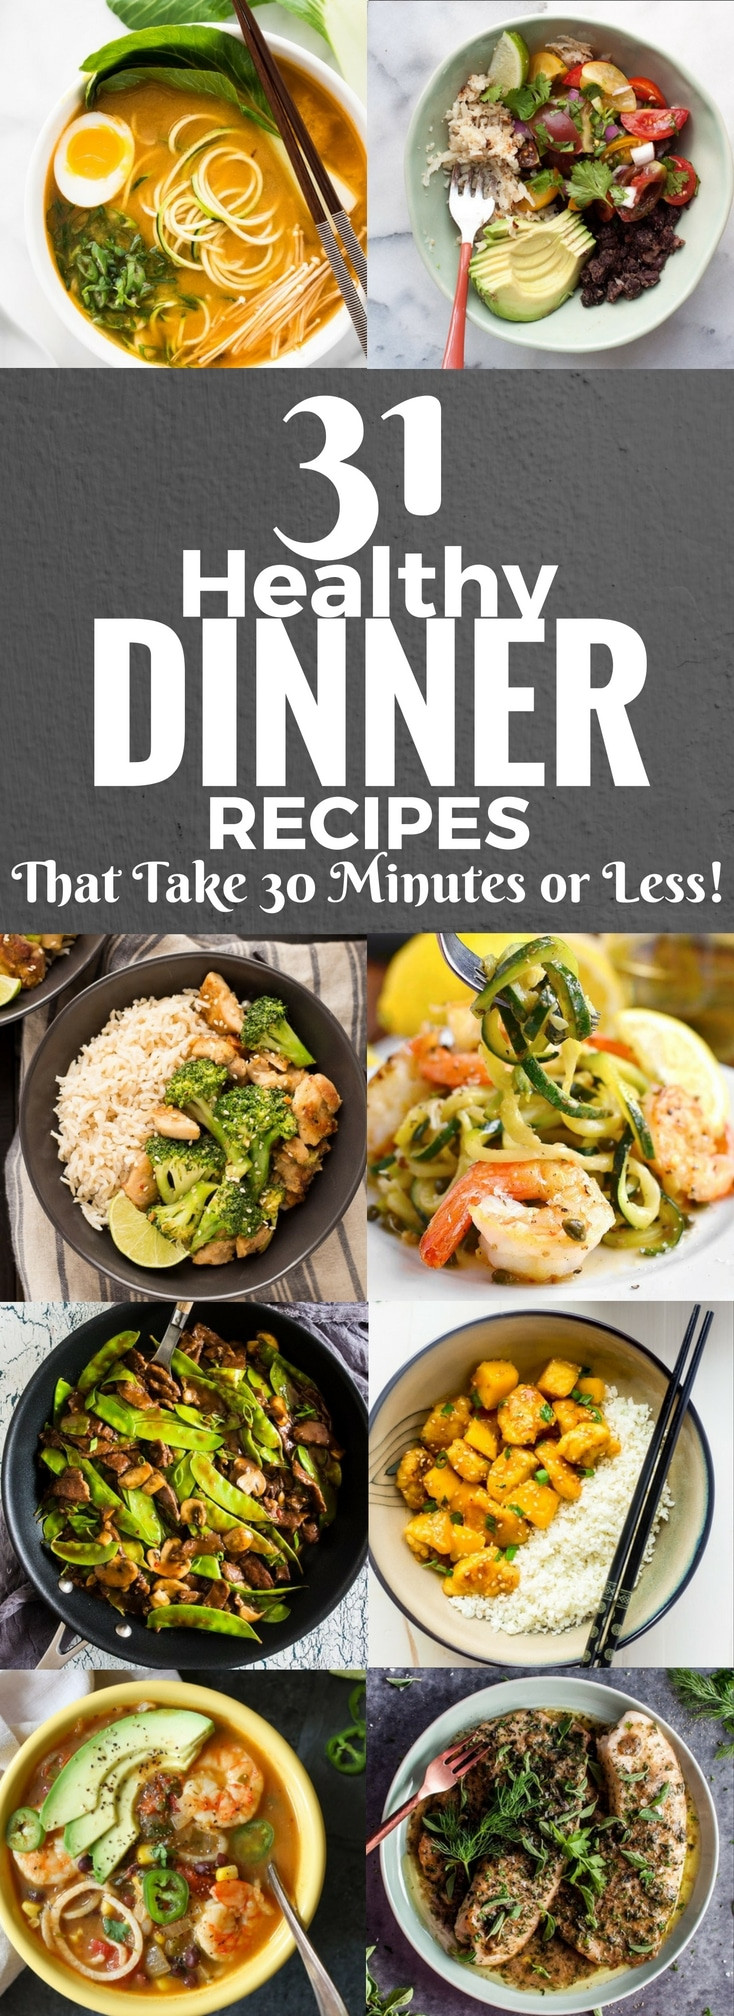 Pinterest Dinner Ideas
 31 Healthy Dinner Recipes That Take 30 Minutes or Less